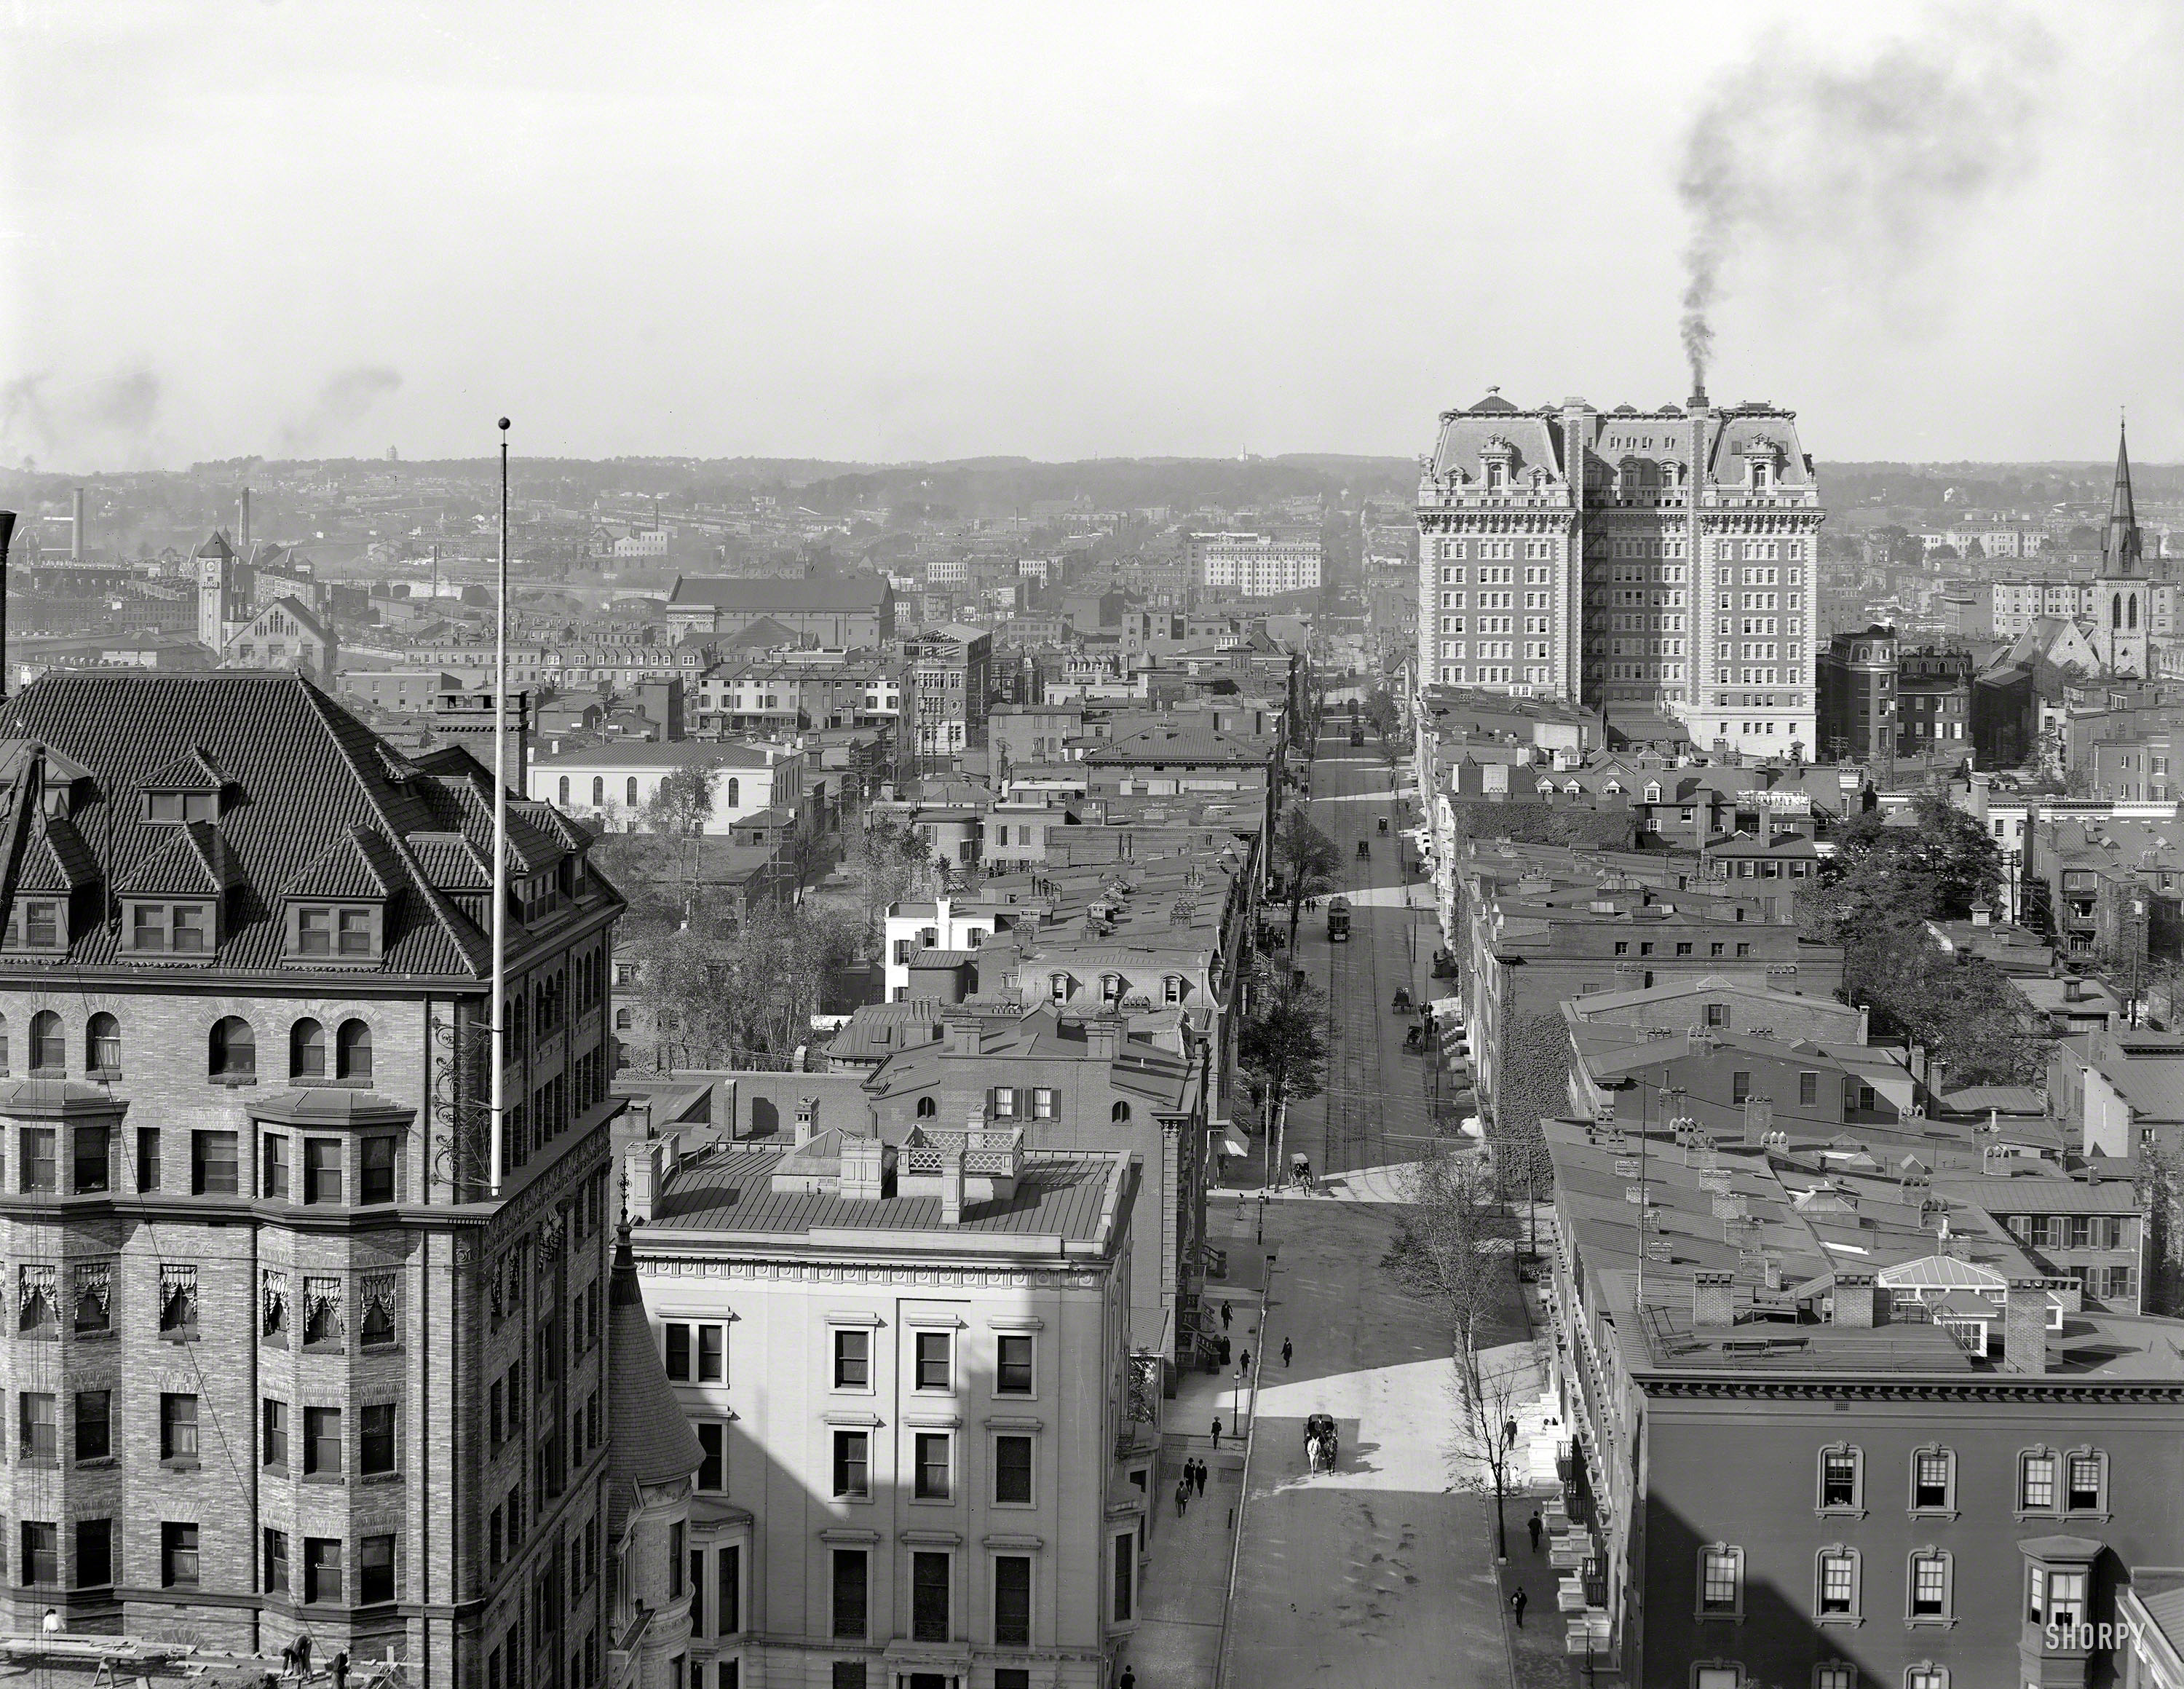 Baltimore, Maryland, circa 1906. "Looking up North Charles Street from Washington Monument." At right, the massive Hotel Belvedere. 8x10 inch dry plate glass negative, Detroit Publishing Company. View full size.